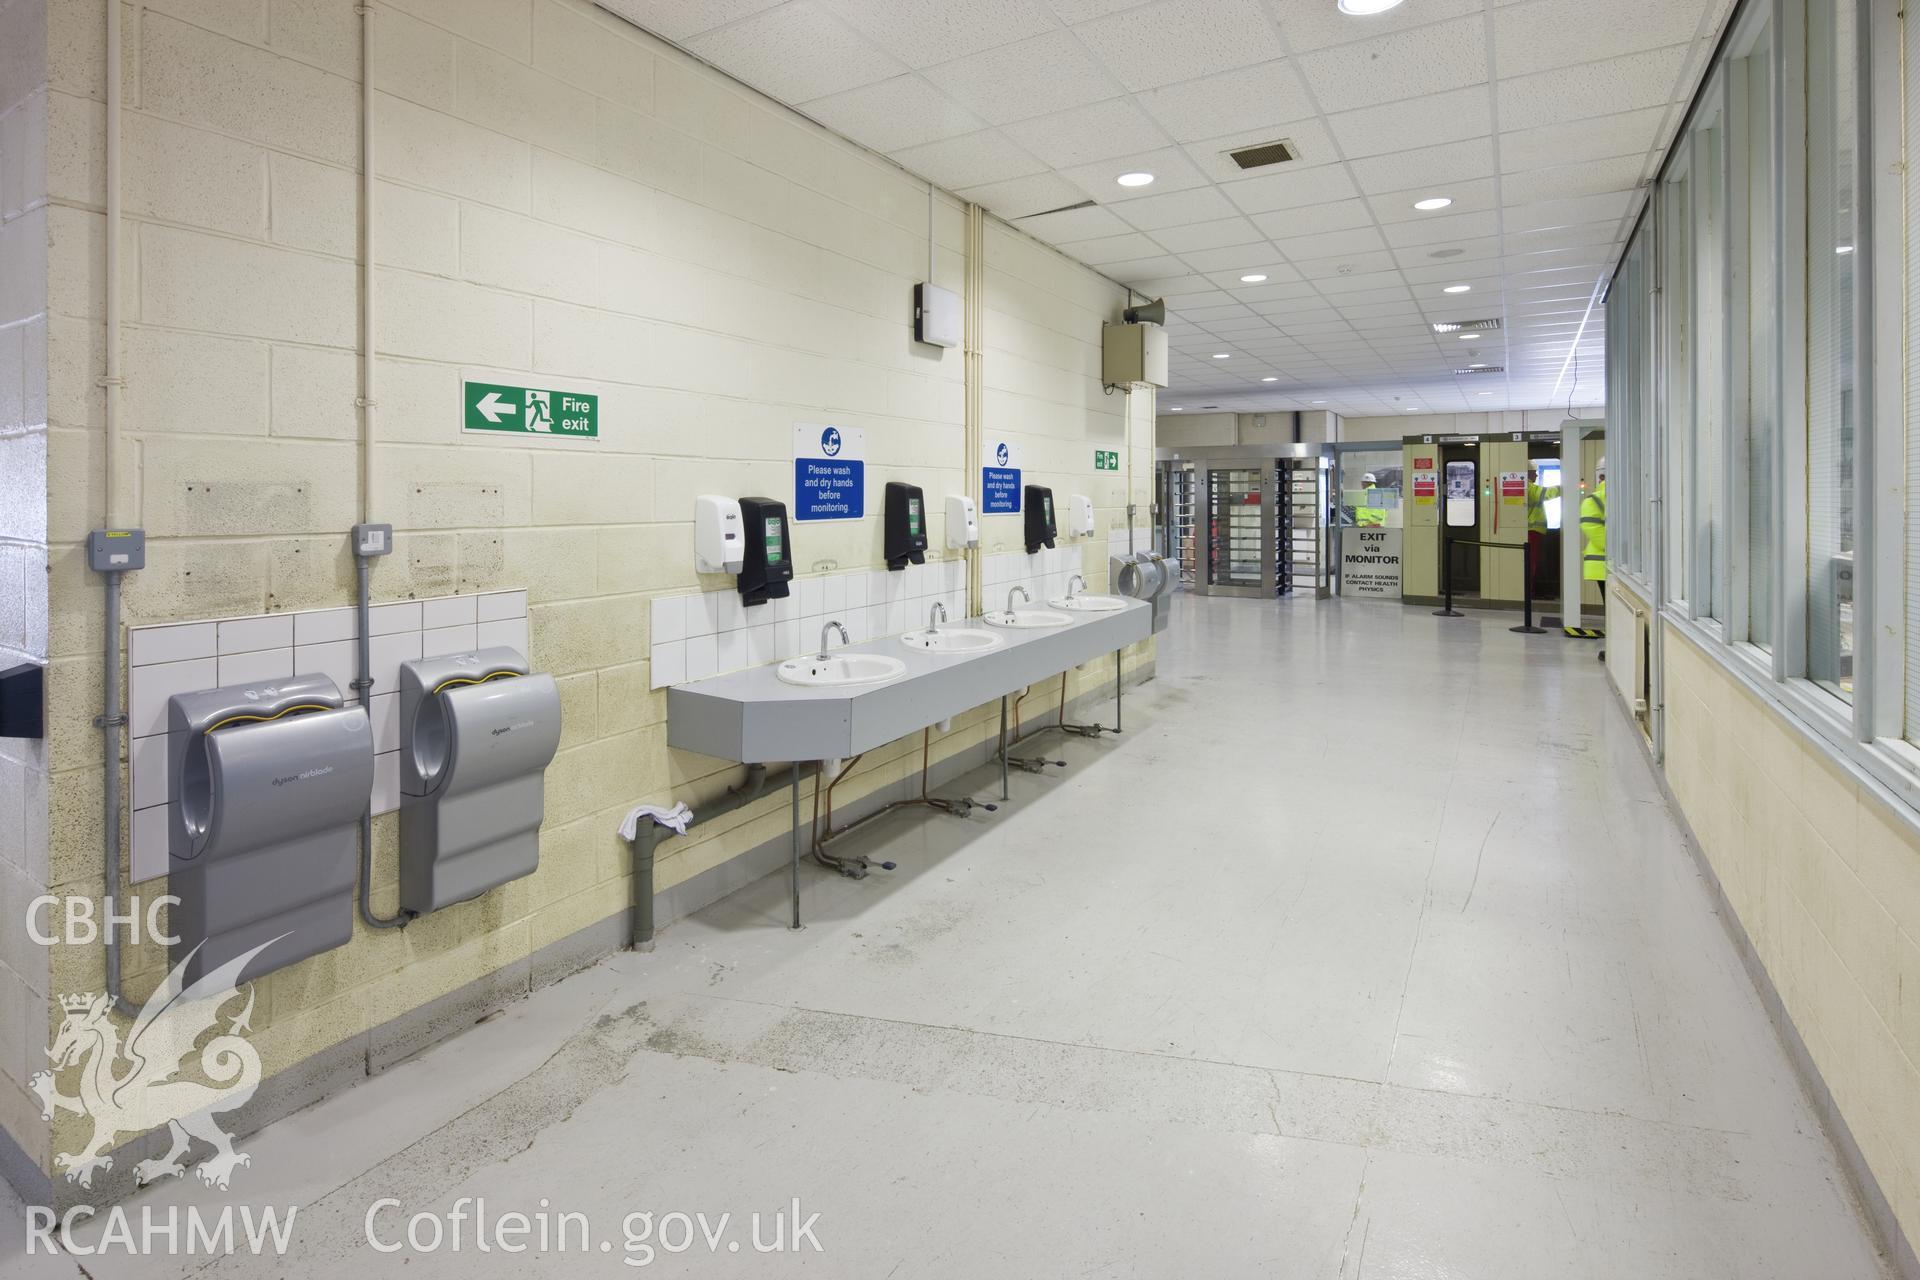 Hand dryers and basins. Workers must wash their hands when leaving (RCA) Radiation Controlled Areas.